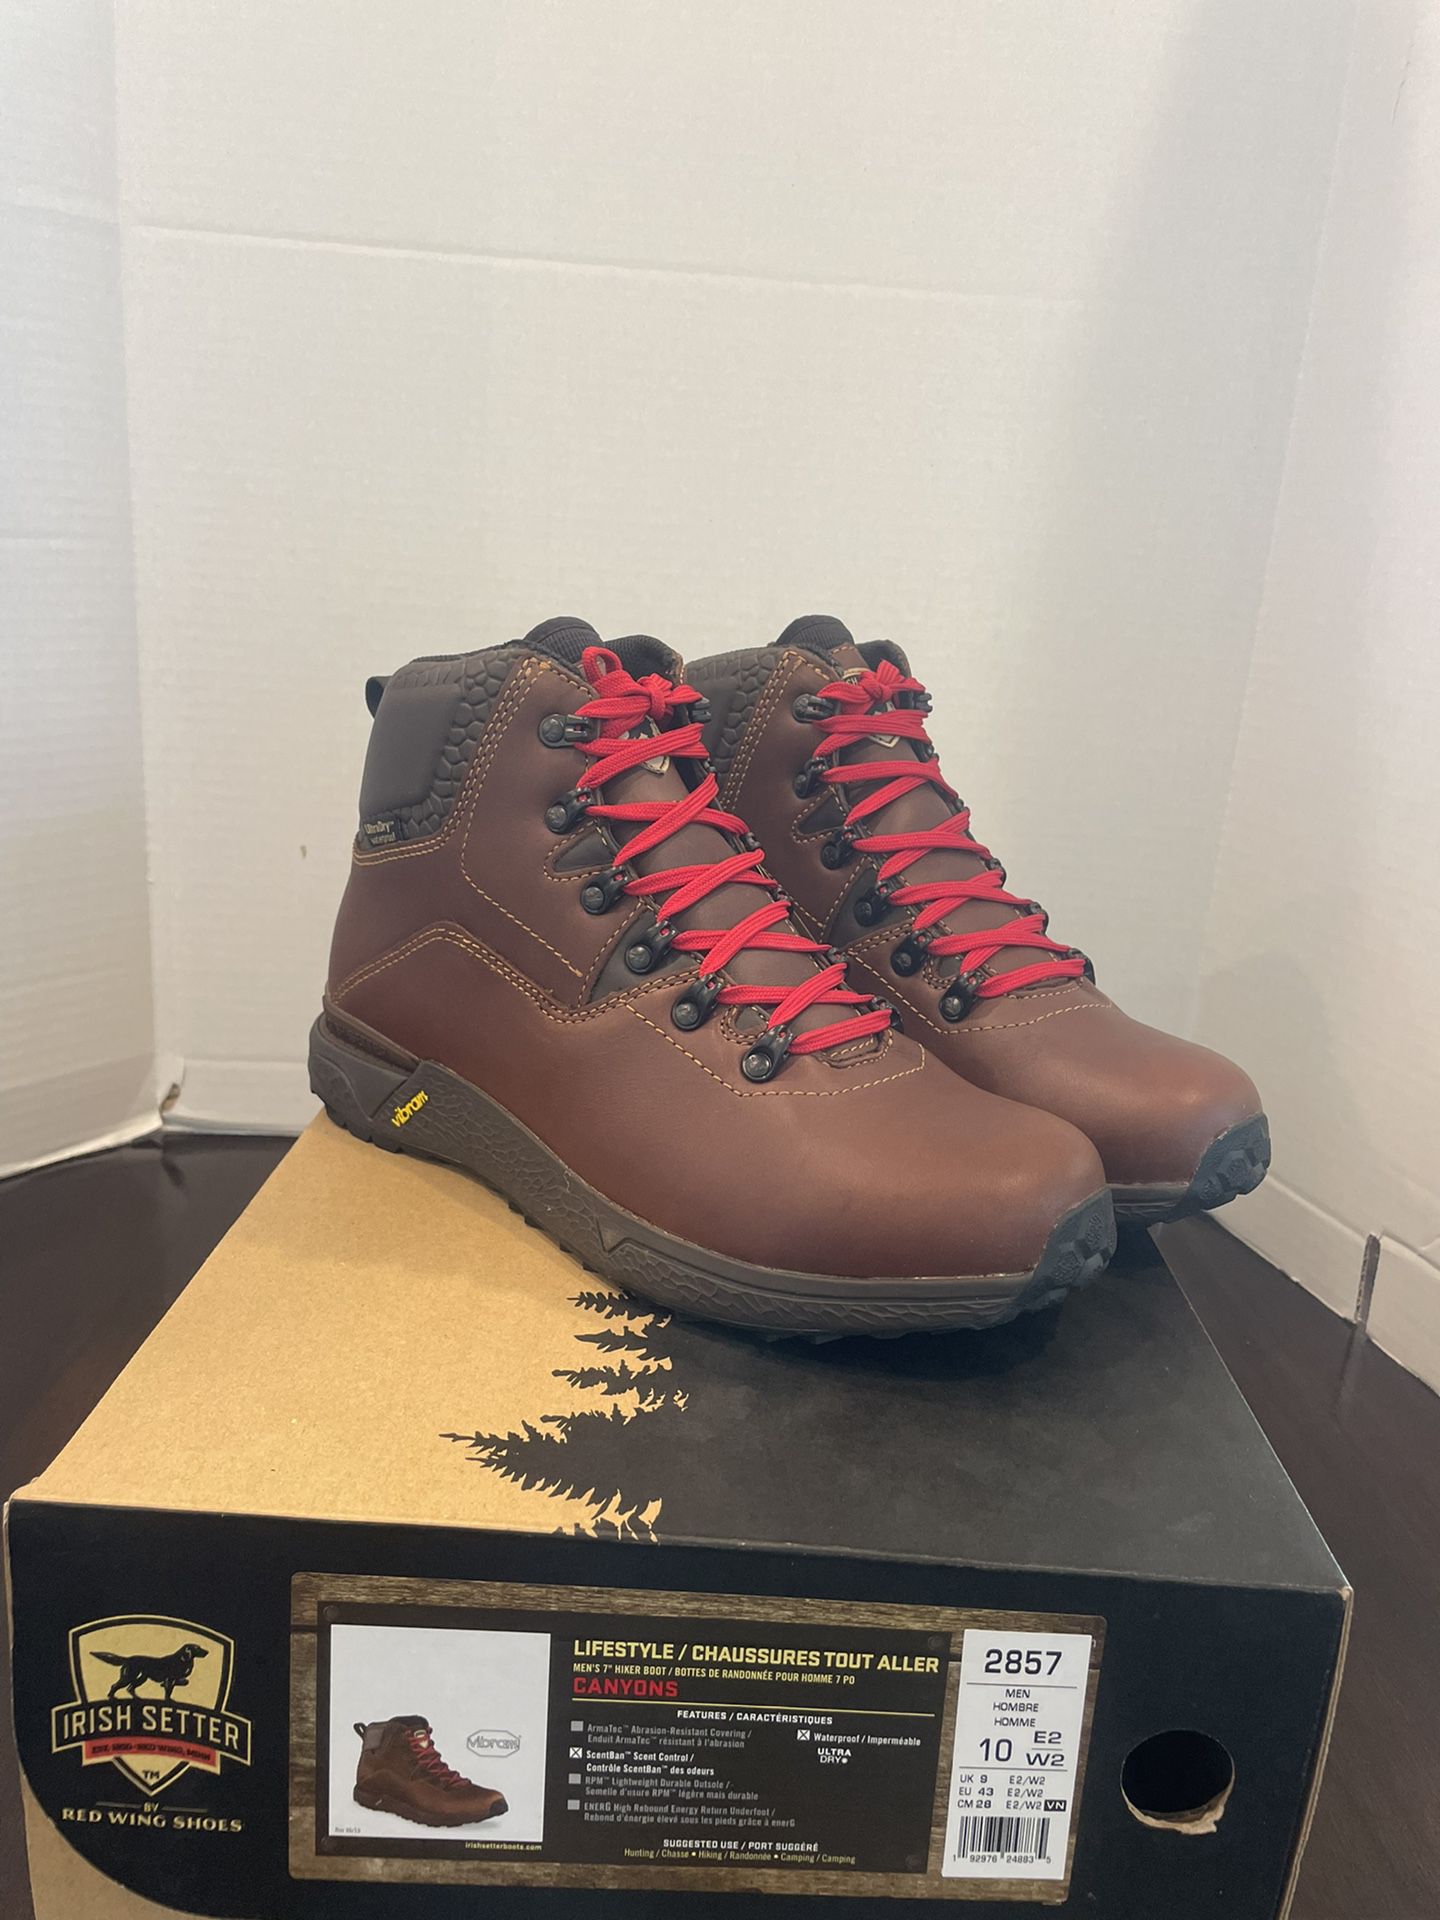 Irish Setter By Red Wing Canyons 7" Hiking Boots Sz 10 Men - 2857 Retails $170 Asking $120